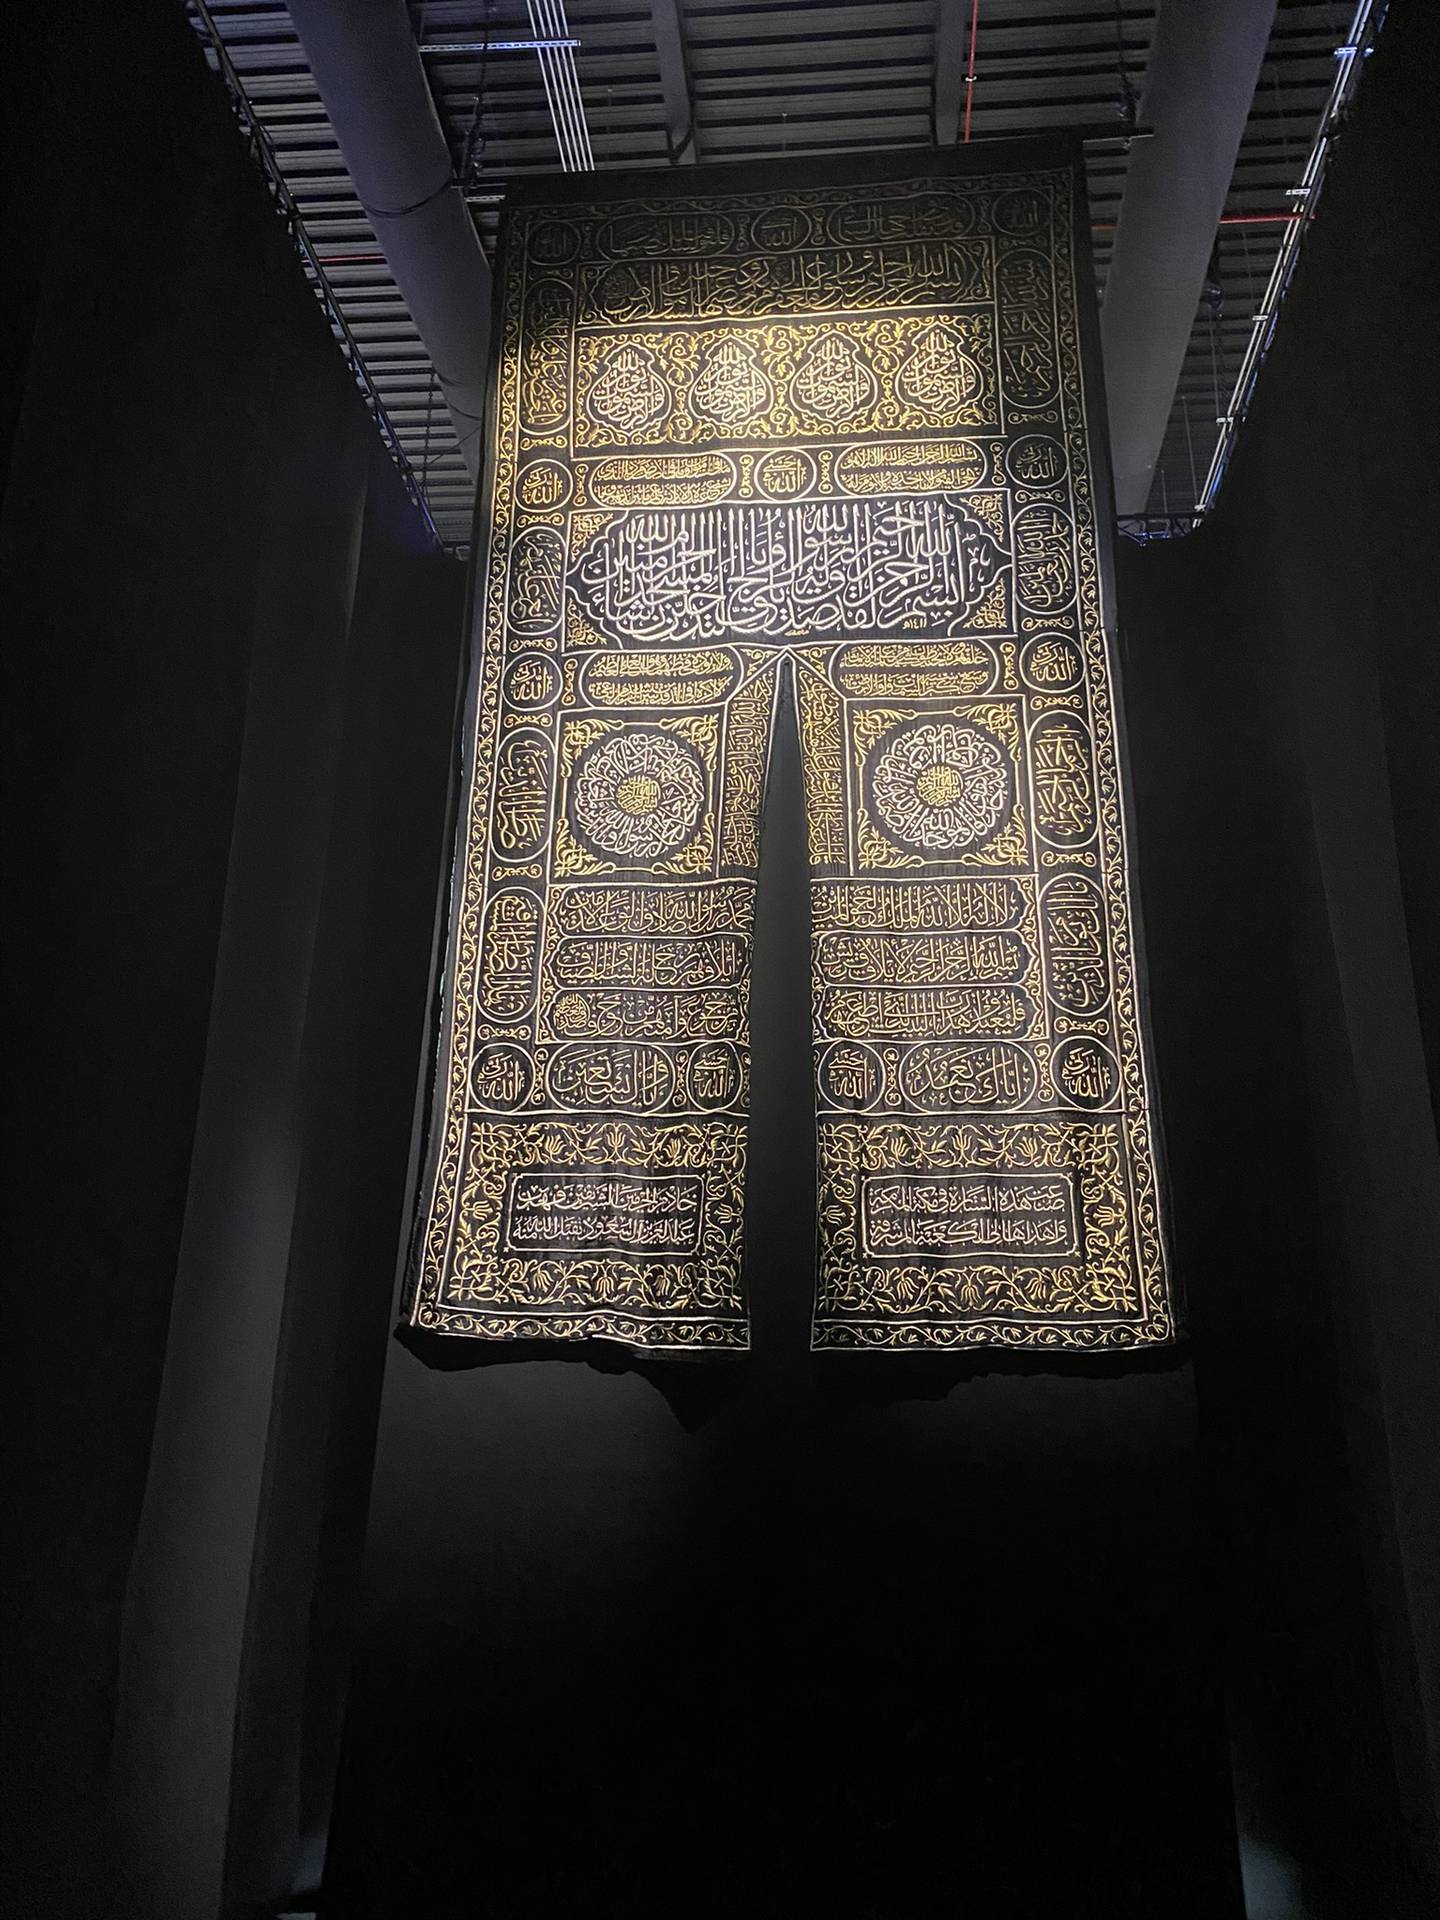 The sitara, or curtain, commissioned by King Fahd bin Abdulaziz for the Kaaba in 1990. Crafted from silk and metal threads, it measures 634cm by 333cm. Hareth Al Bustani / The National